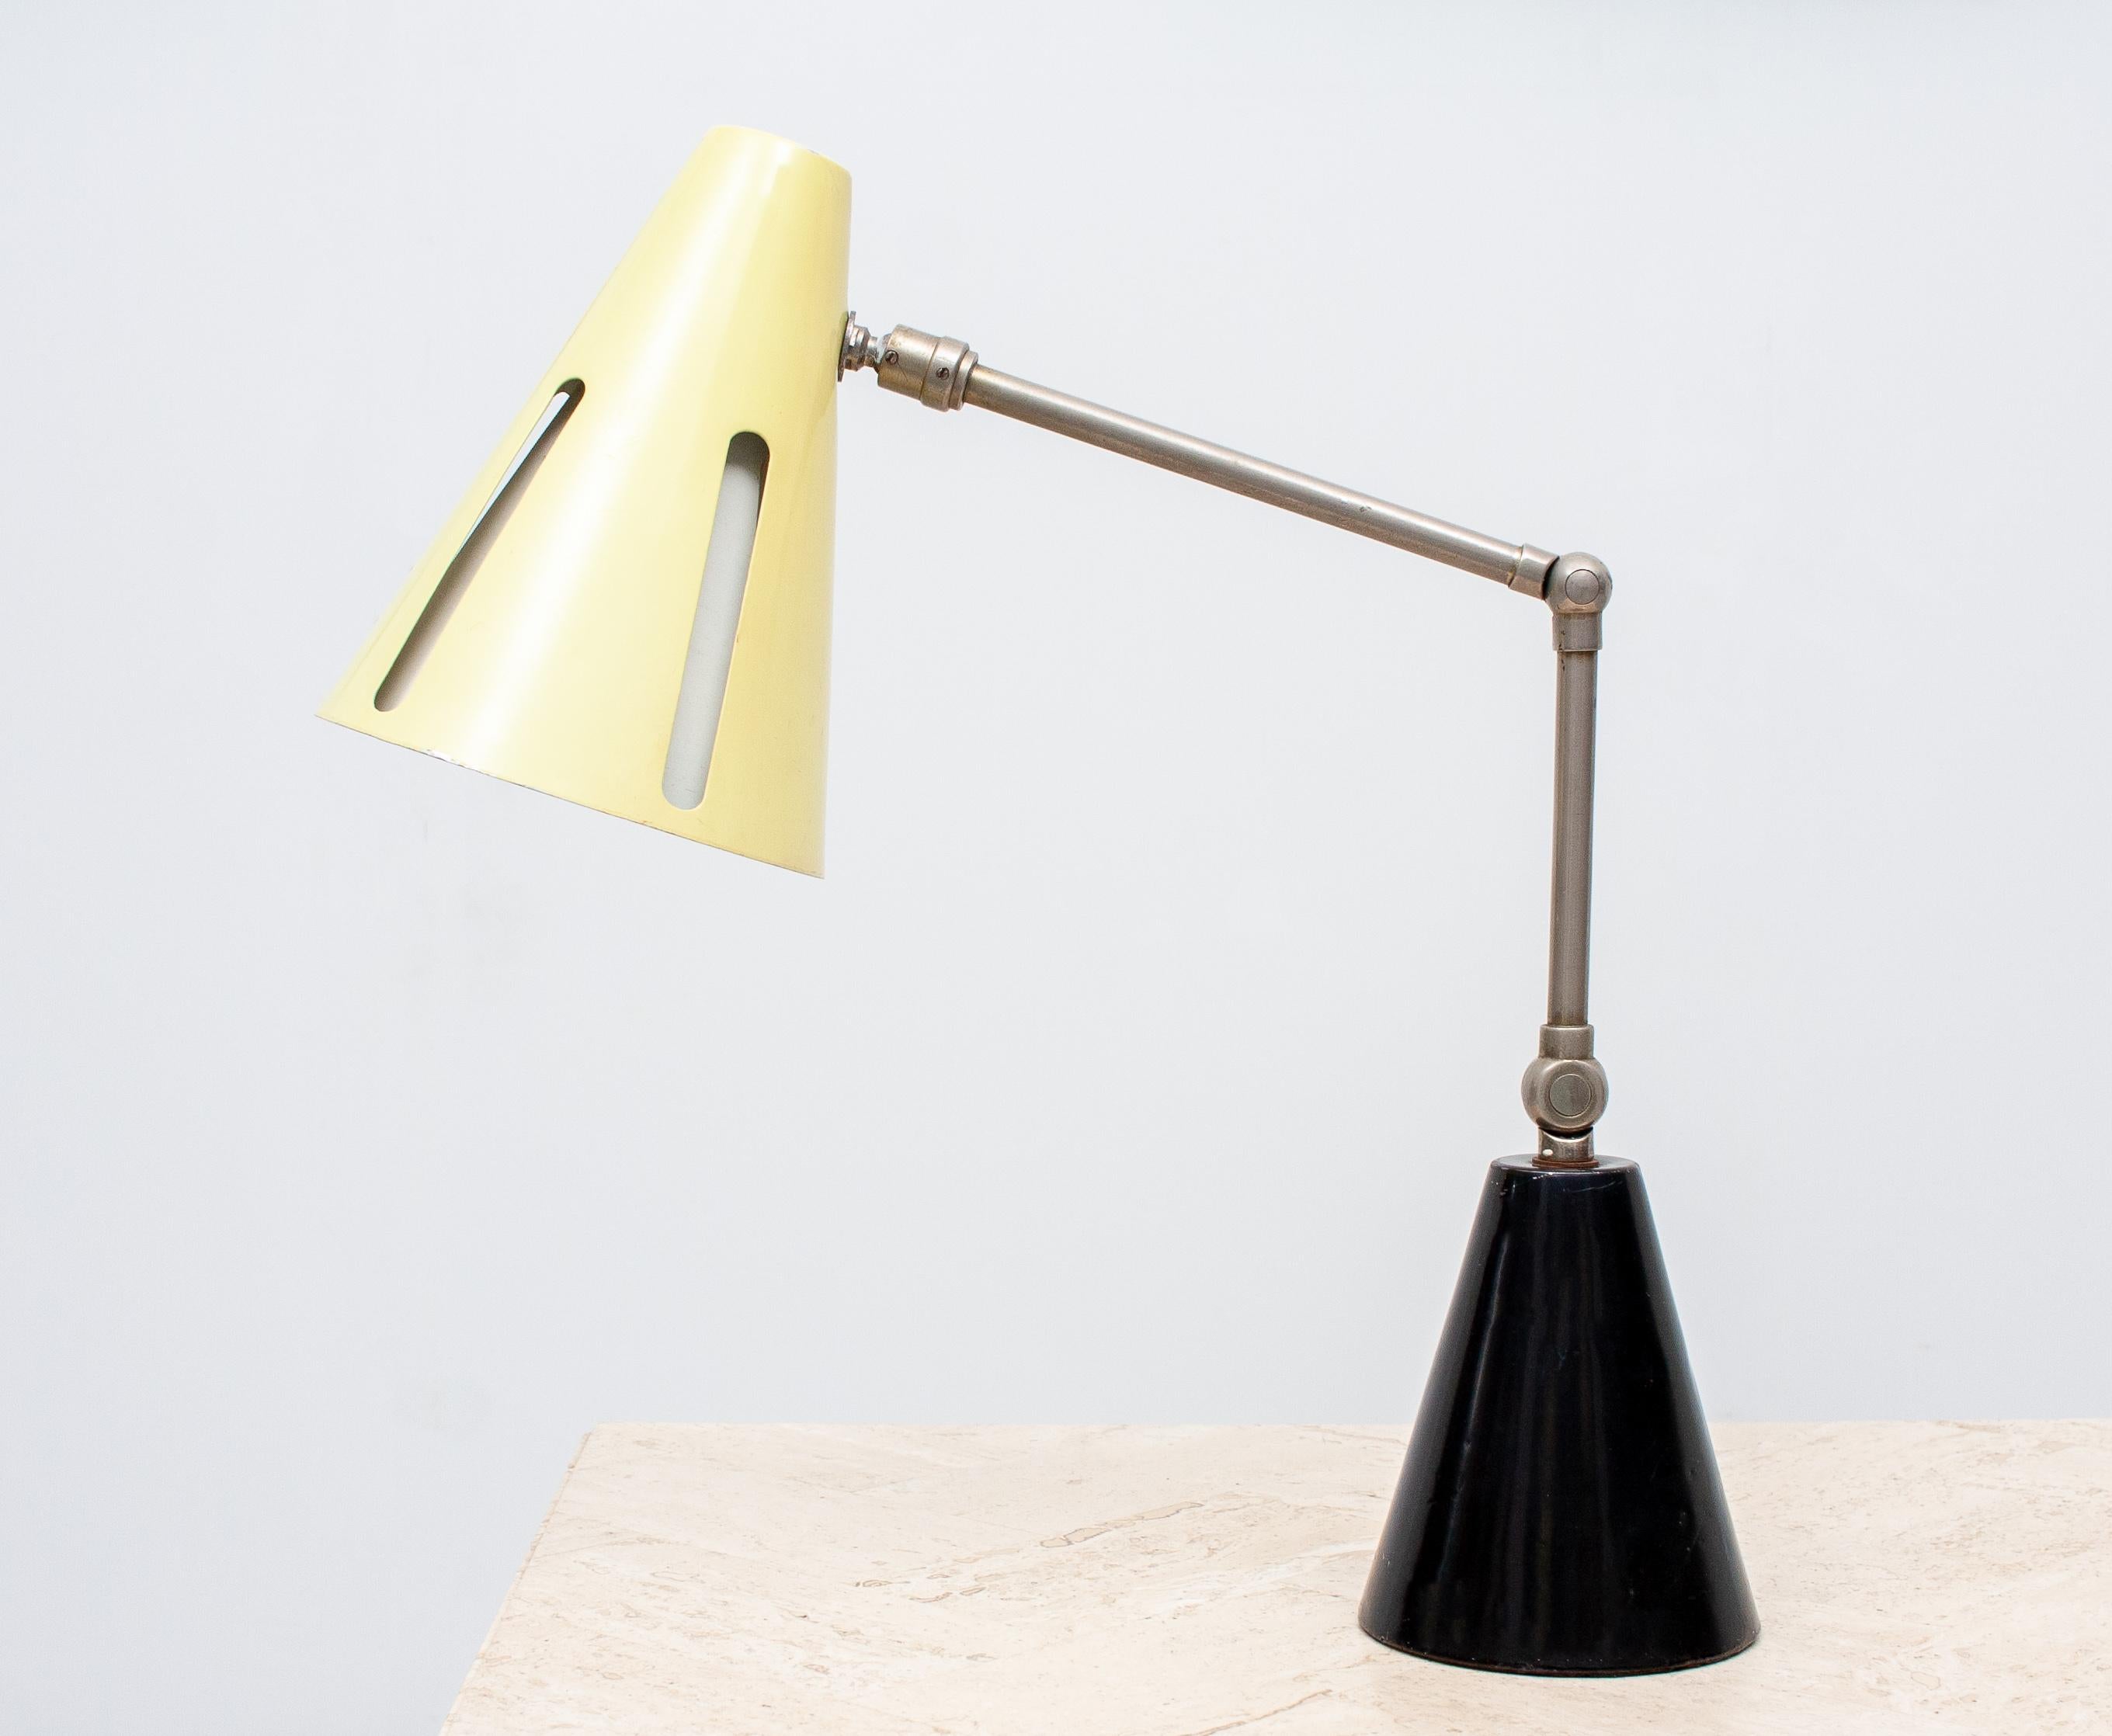 Rare light yellow “Zonneserie” piano lamp or table lamp “Model 7” designed by H. Busquet for Hala in around 1956. This Hala lamp has a heavy base that allows it to hang far forward. The “Solar Series” consists of a series of lamps with the “Solar